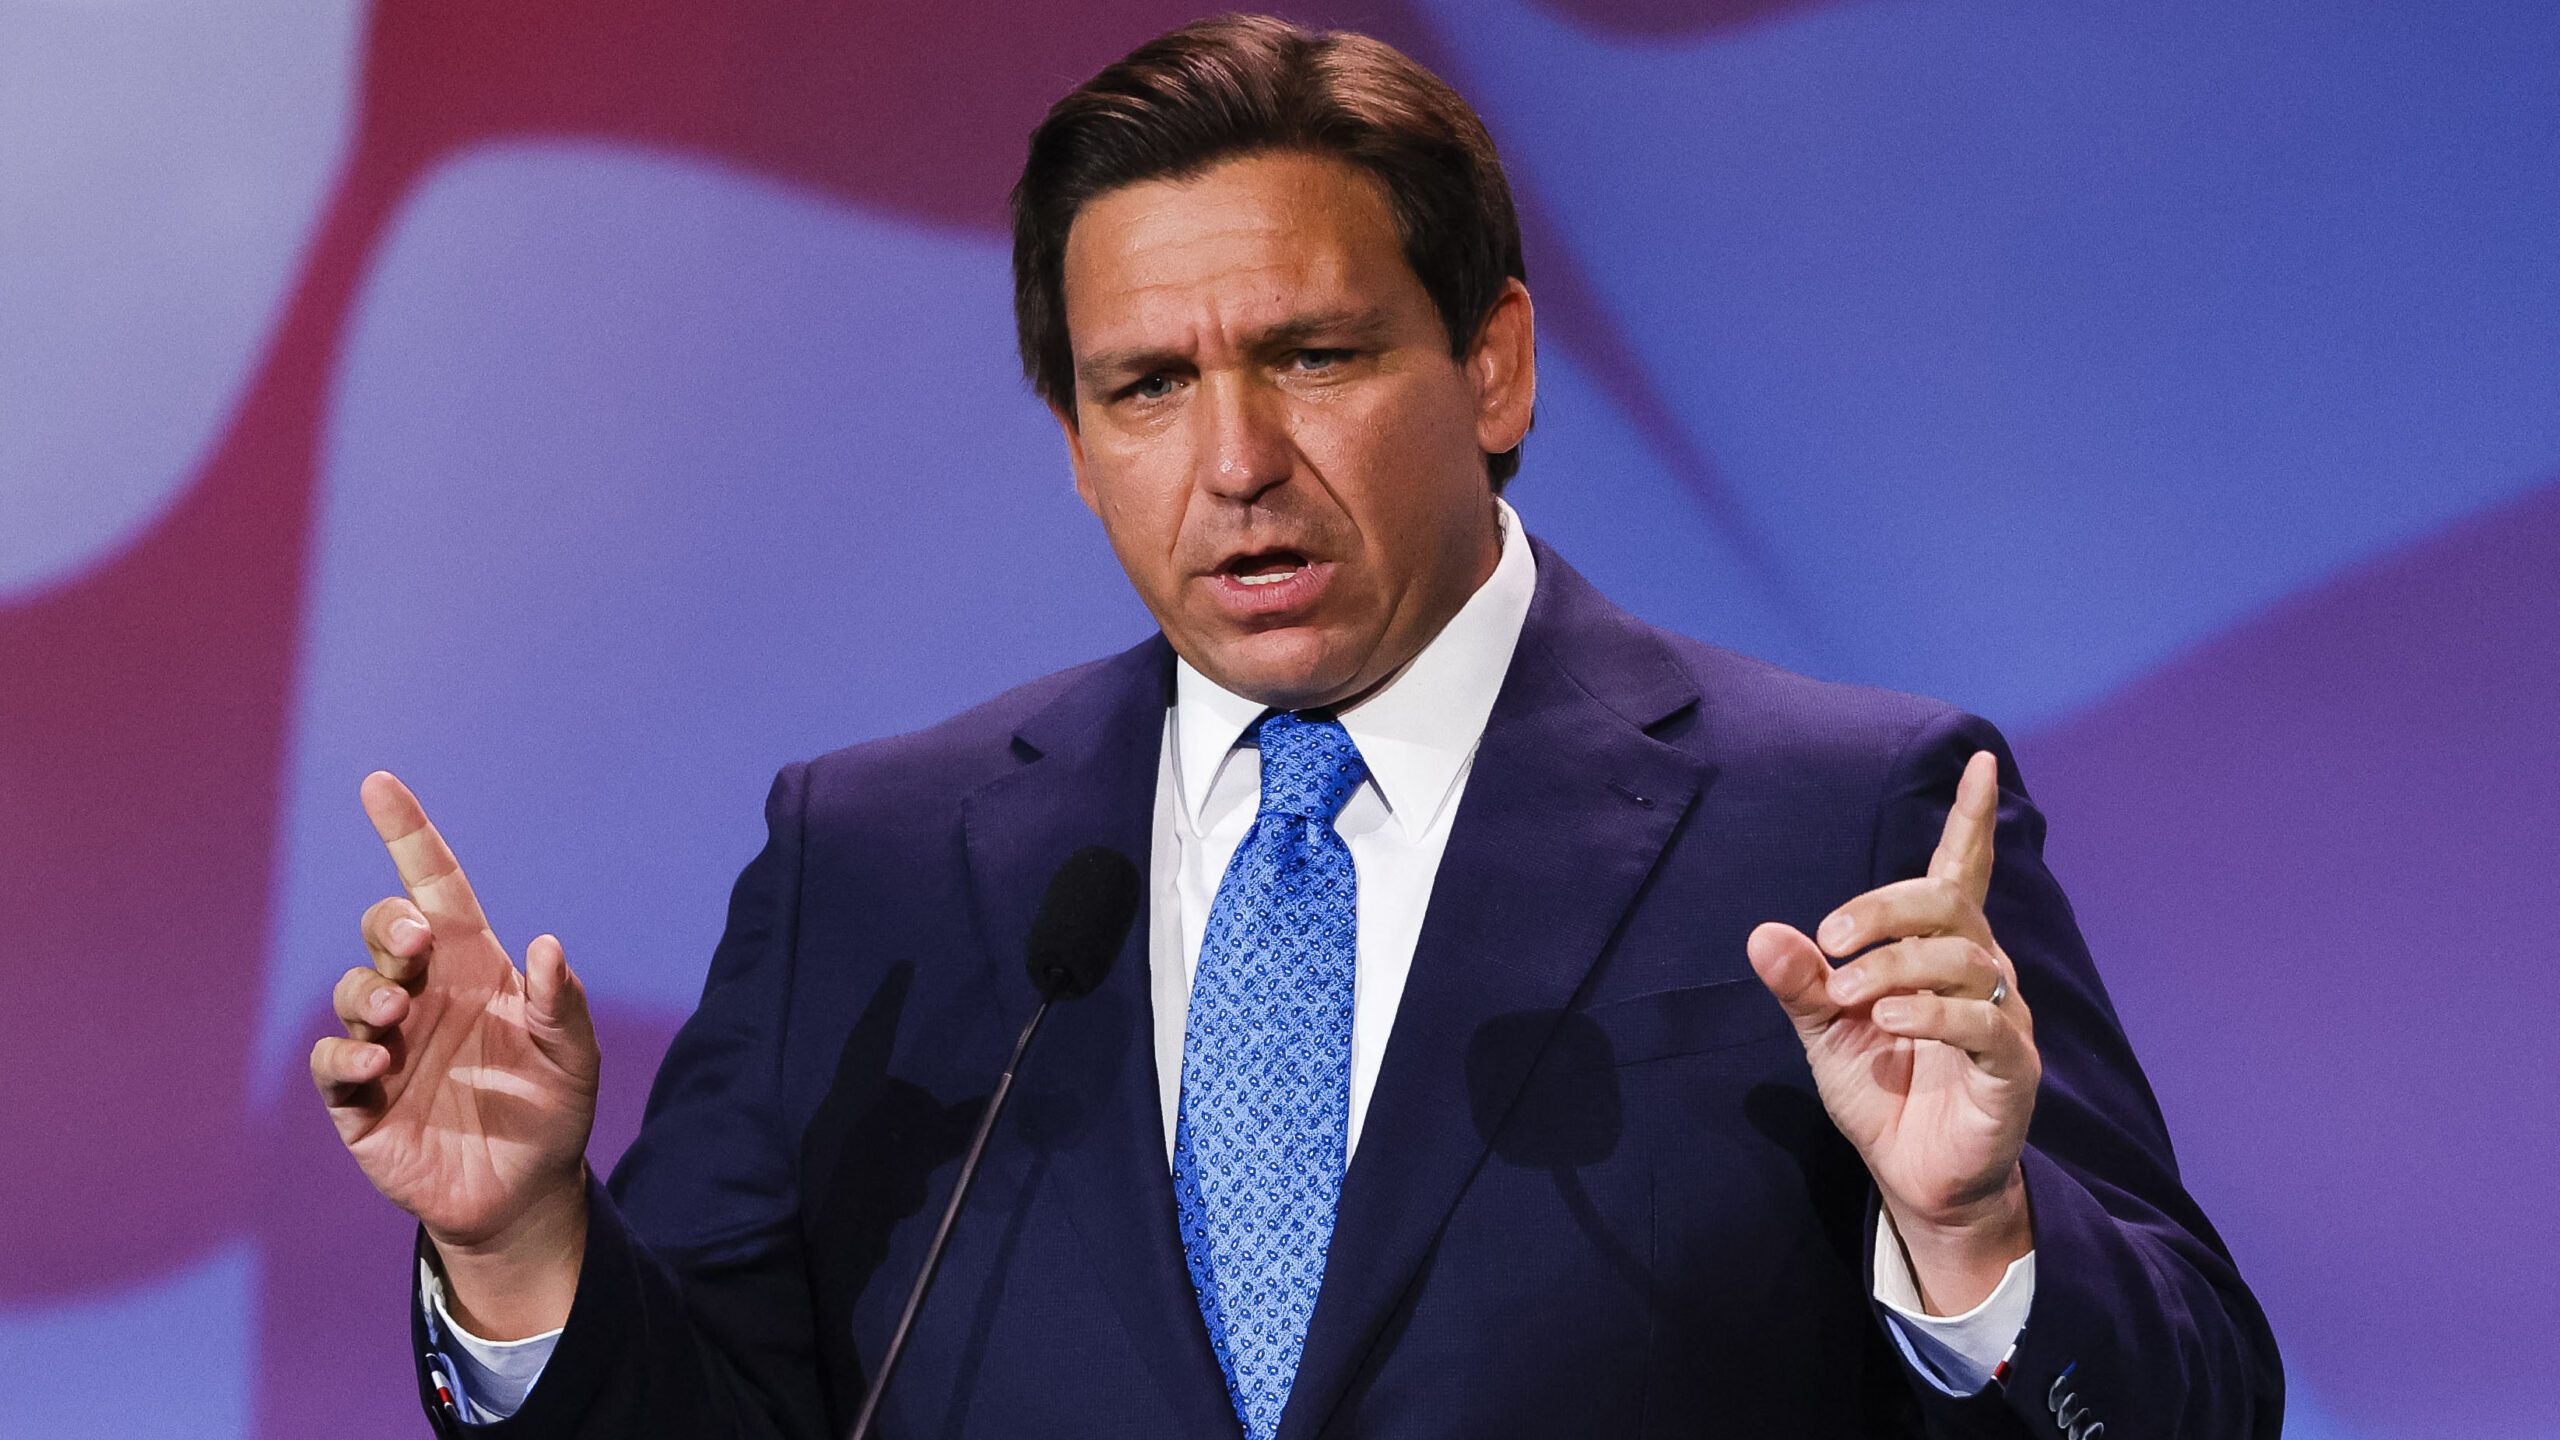 desantis-explains-why-republicans-failed-to-deliver-red-wave-during-midterms